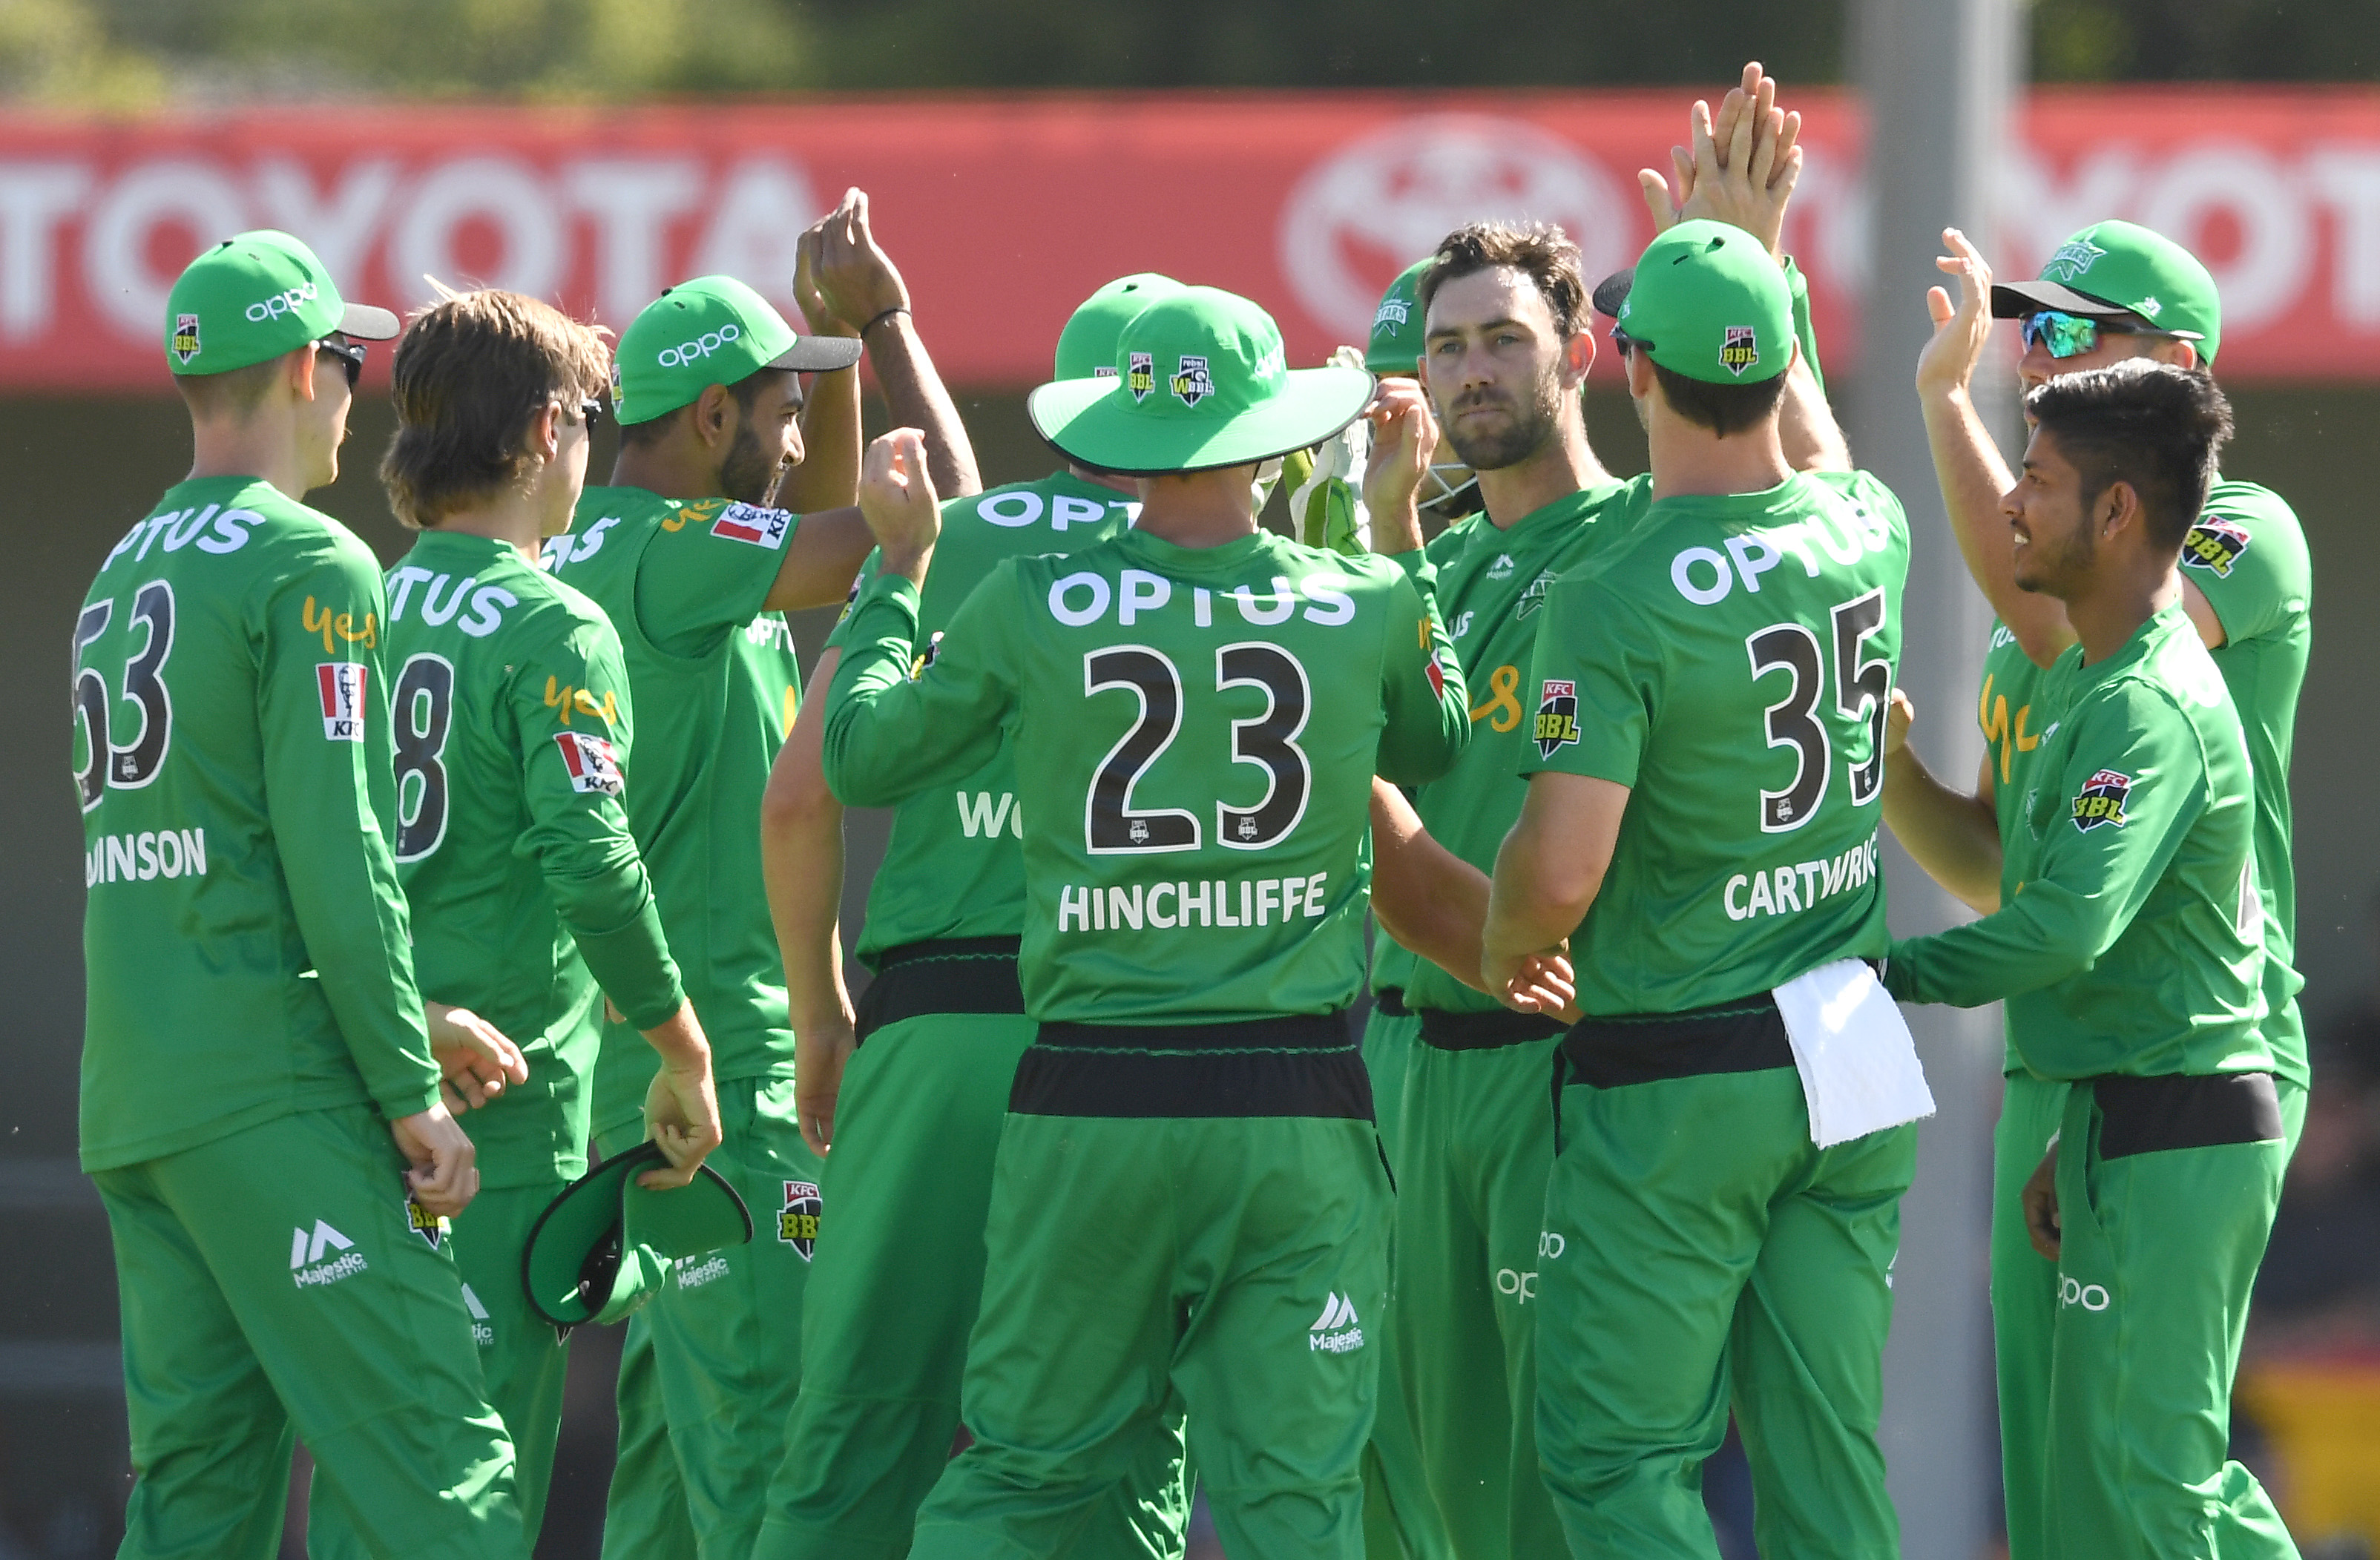 BBL 2019-20 | Stars vs Hurricanes Evaluation Chart - Haris Rauf’s pace too hot to handle for Hurricanes